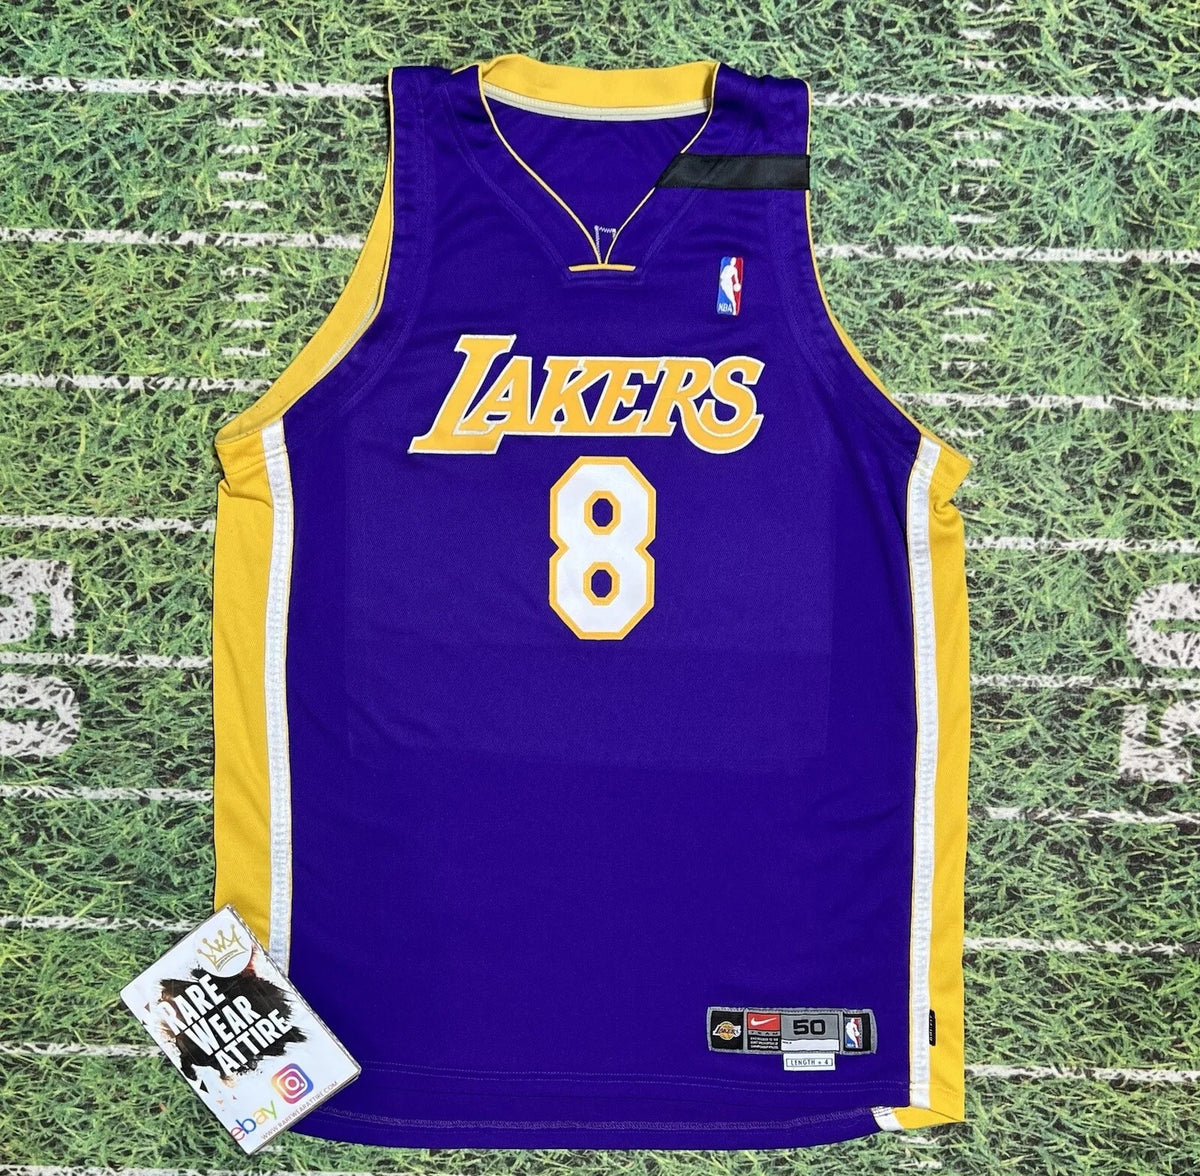 ANDREW BYNUM Los Angeles LAKERS Basketball ADIDAS XL Jersey White